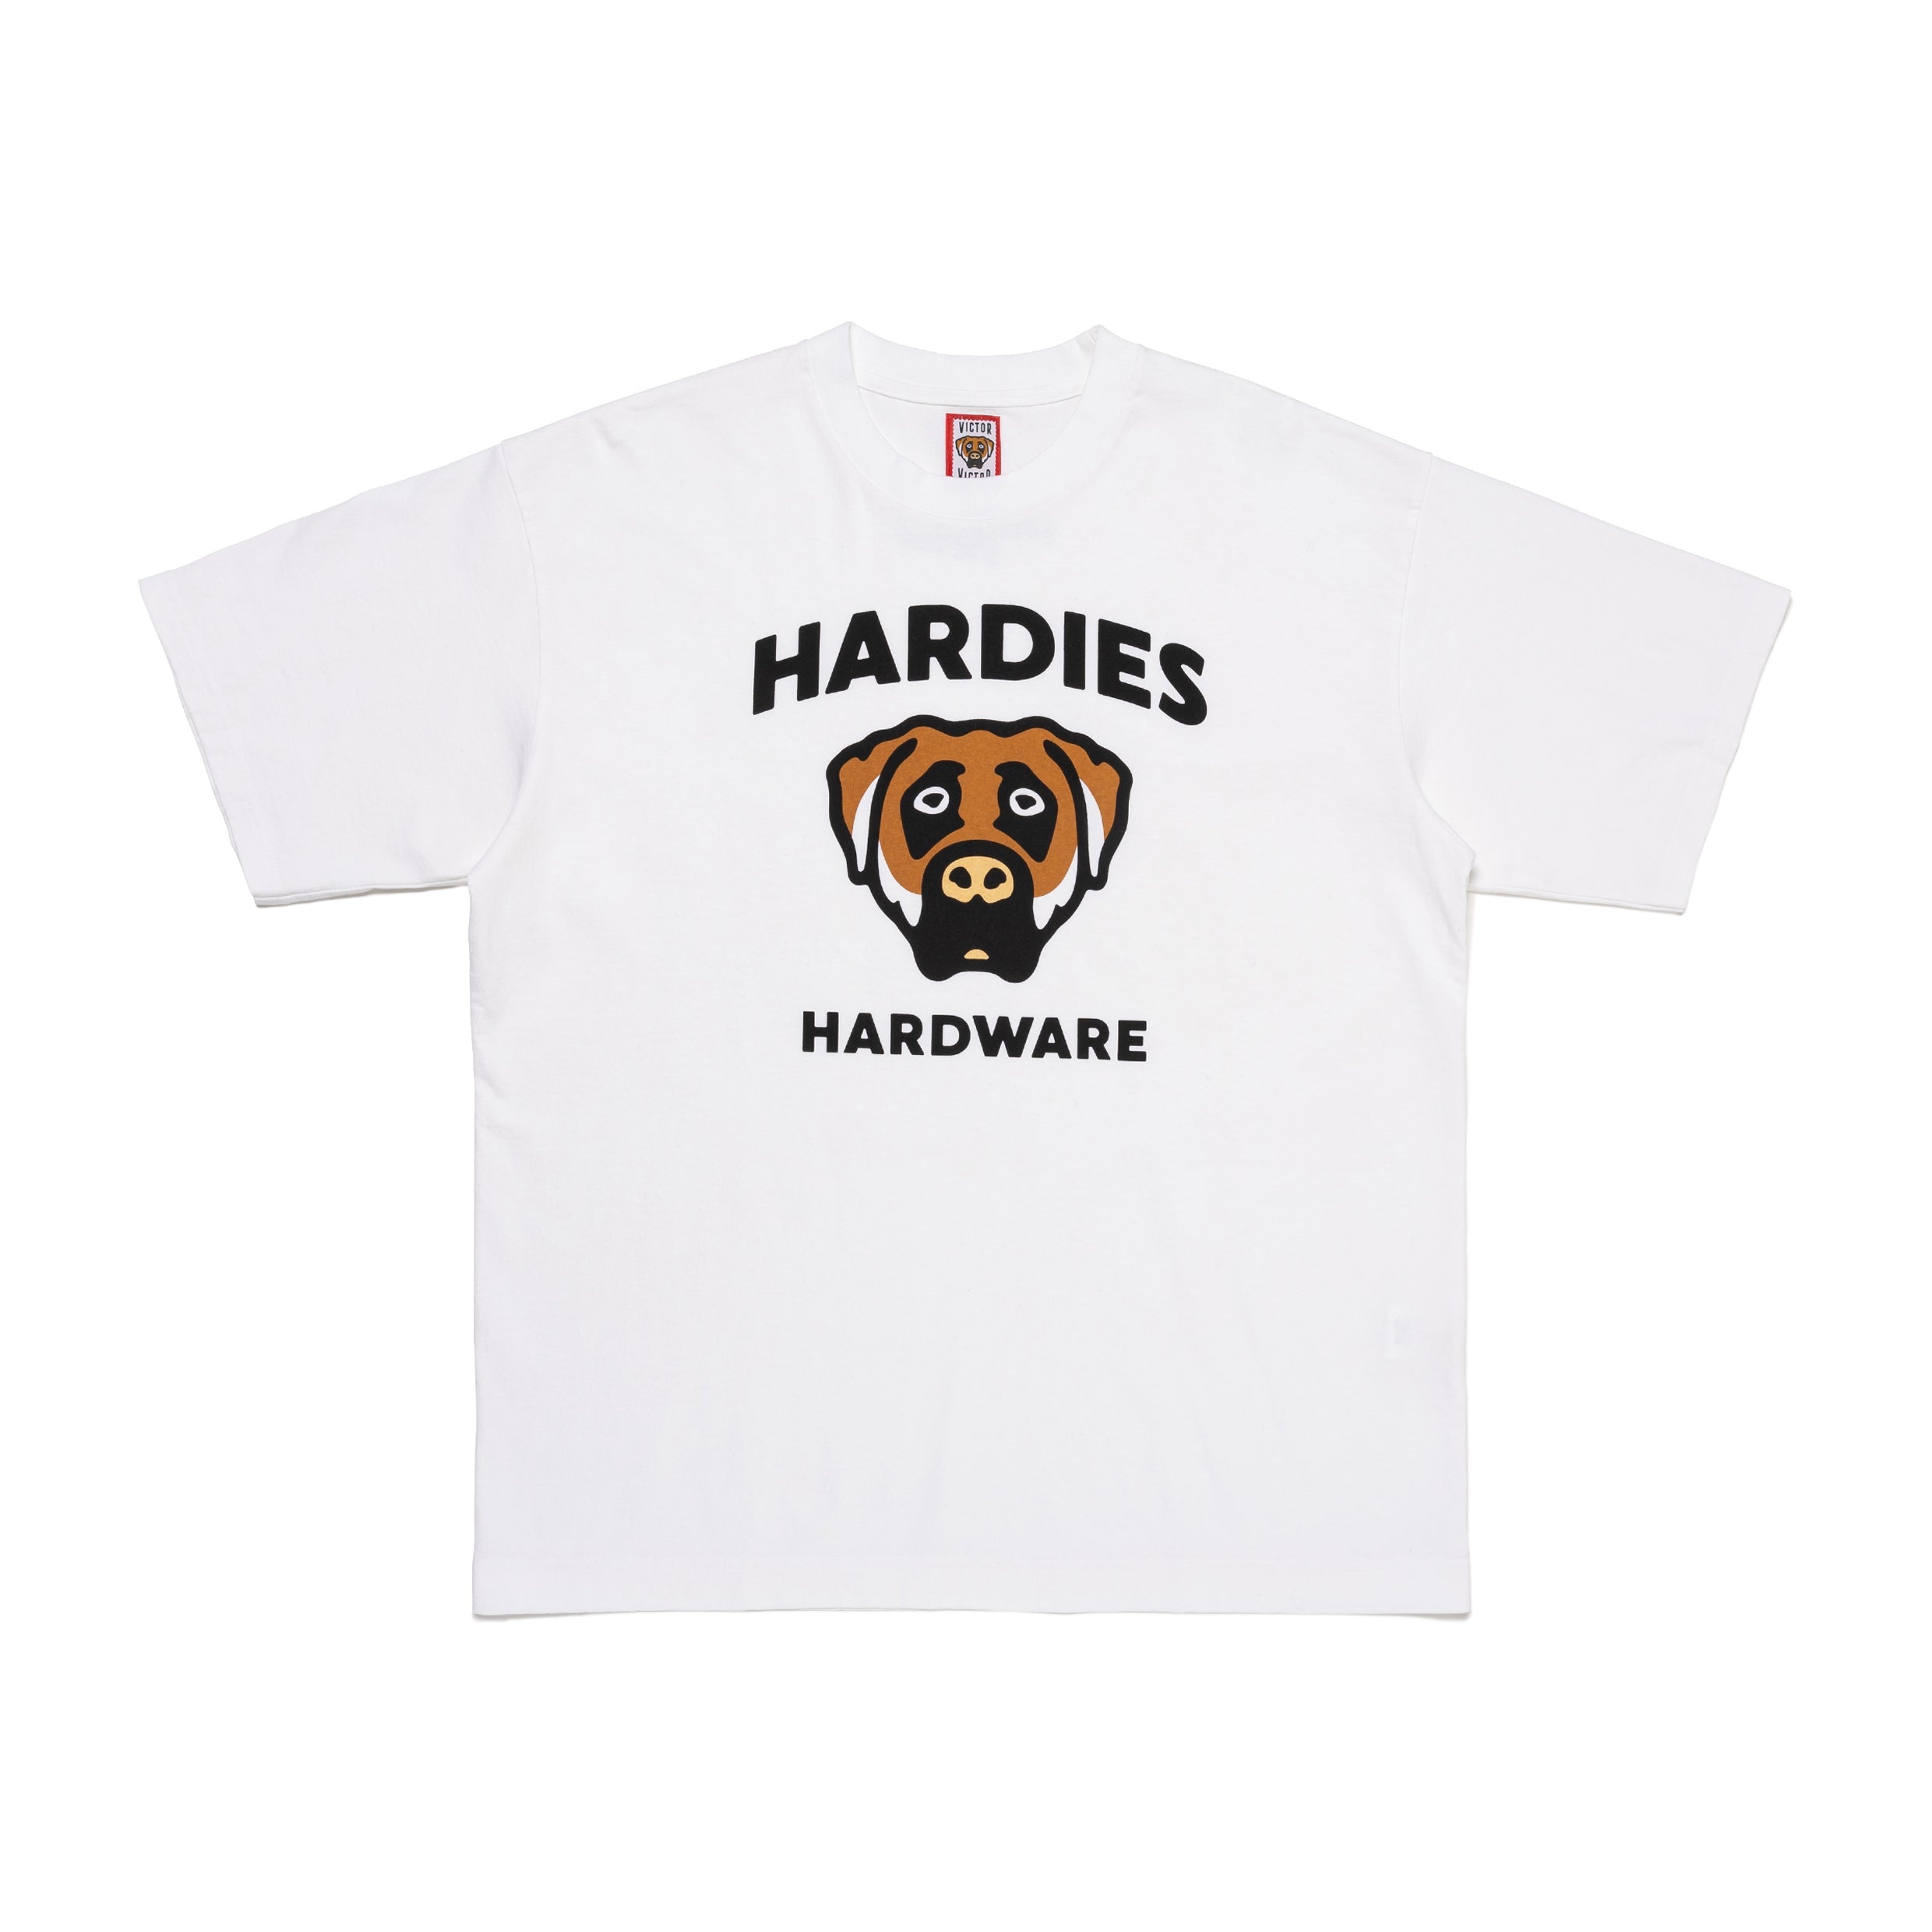 VICTOR VICTOR×HARDIES T-SHIRT #1 – HUMAN MADE ONLINE STORE